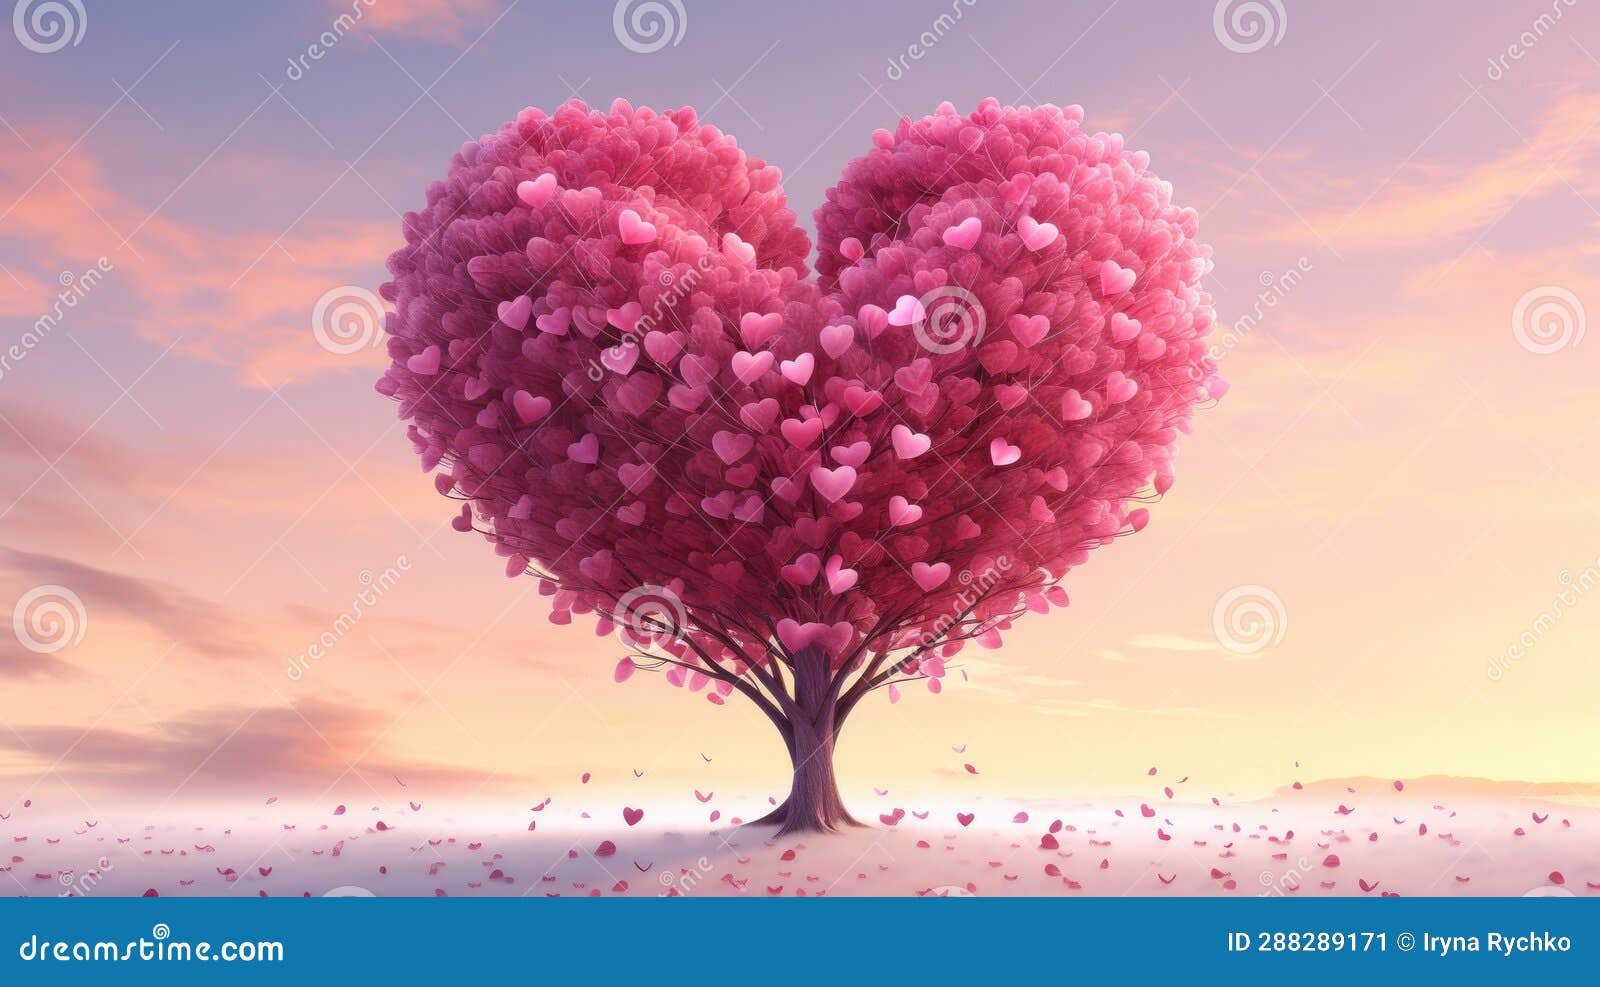 Heart tree Wallpapers Download | MobCup